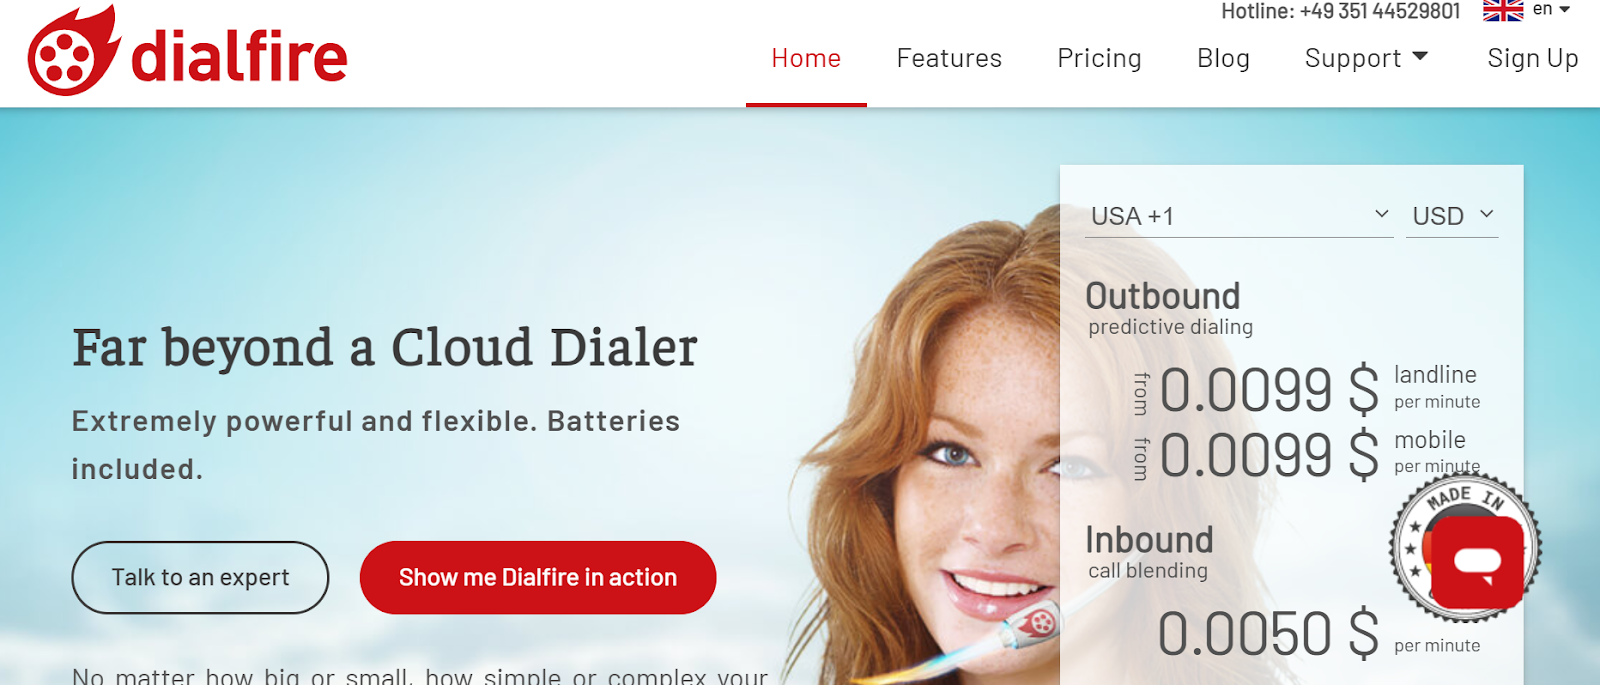 Dialfire website snapshot highlighting the services it offers.